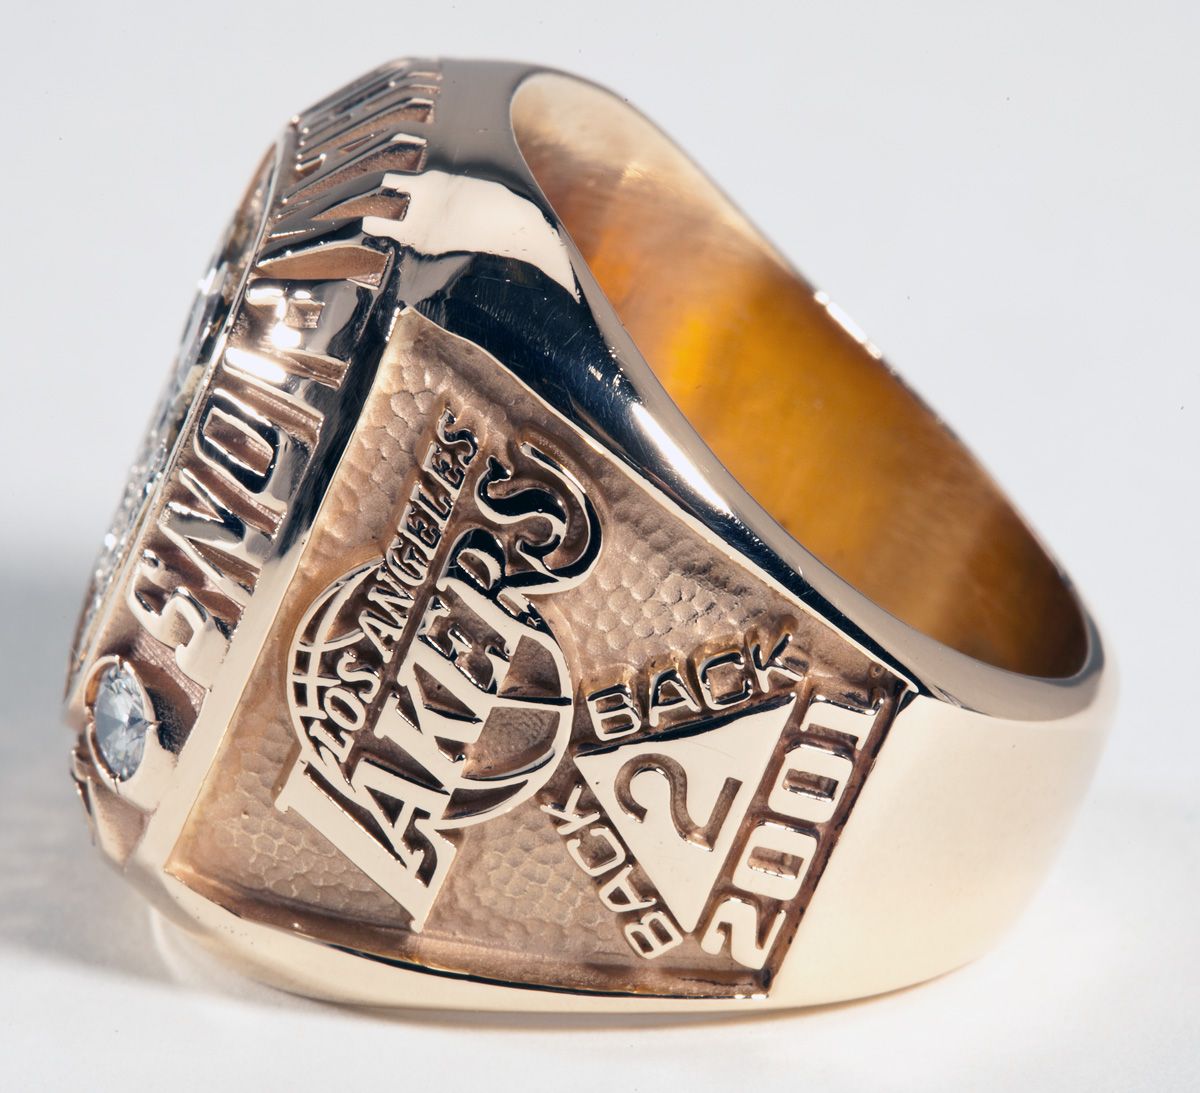 Lamar Odom NBA Lakers Championship Ring Auction